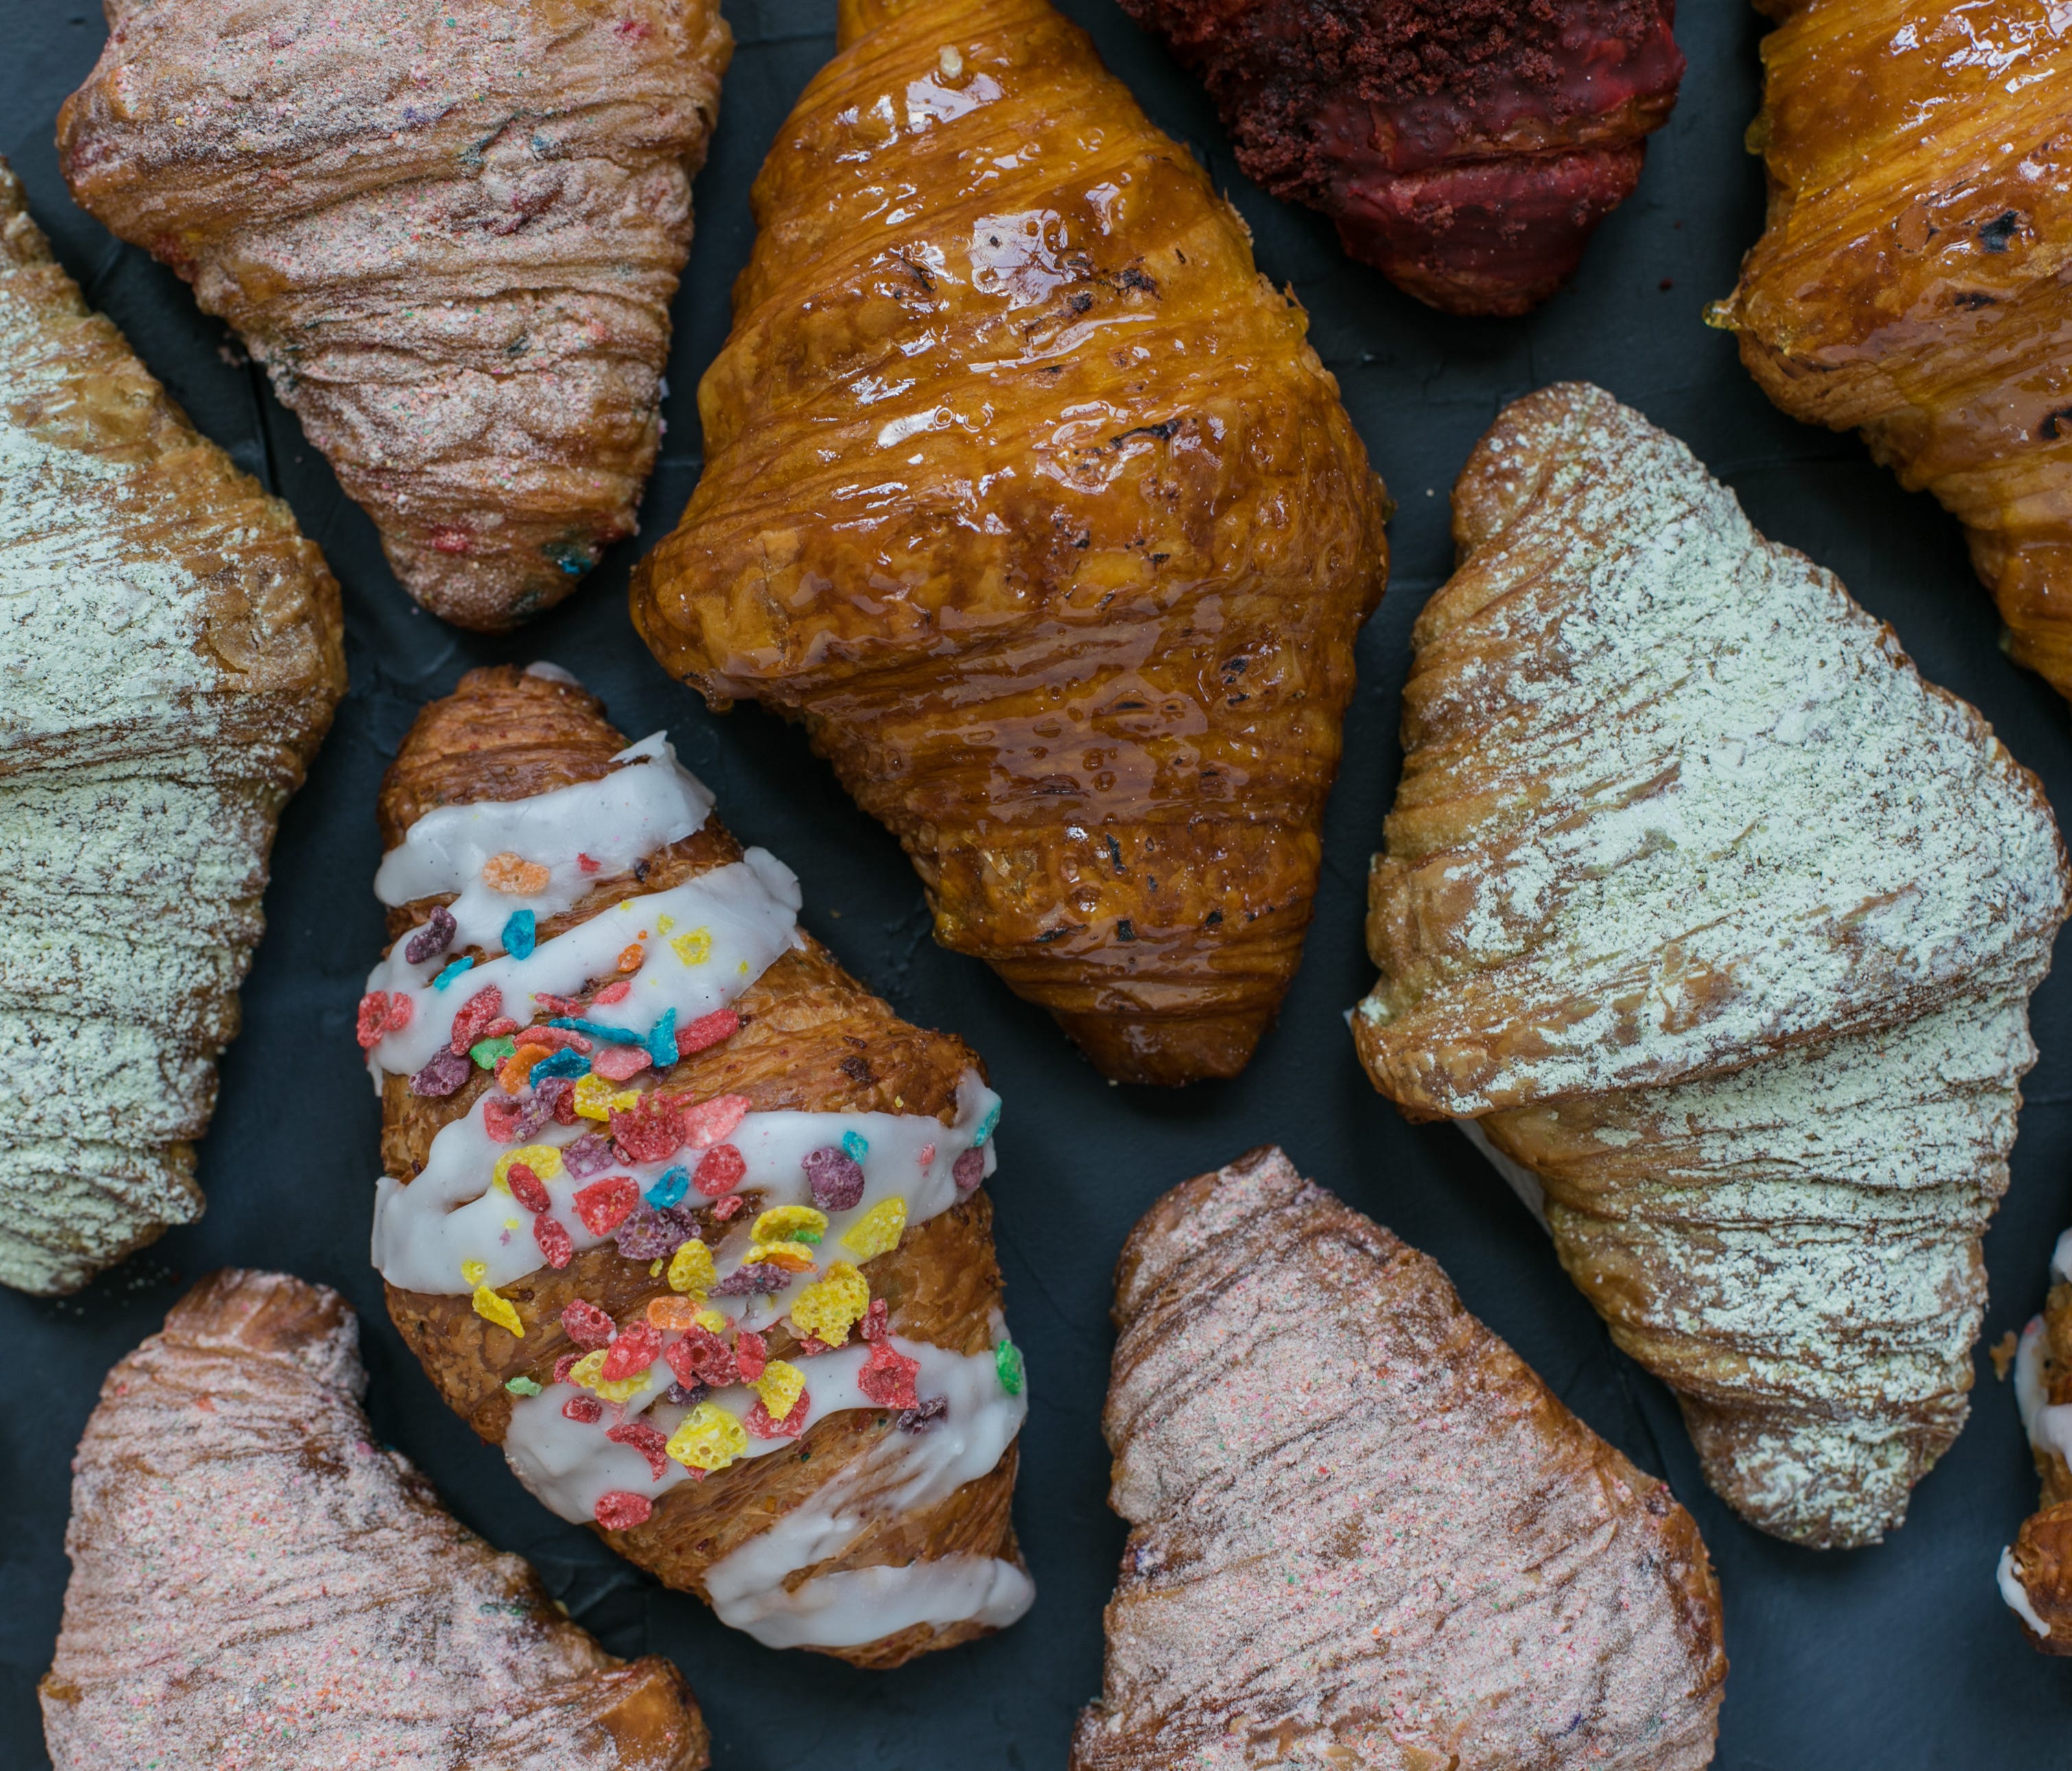 The multi-concept restaurant and food hall's bakery serves birthday cake, matcha, fruitty pebbles and more flavors on and inside croissants.